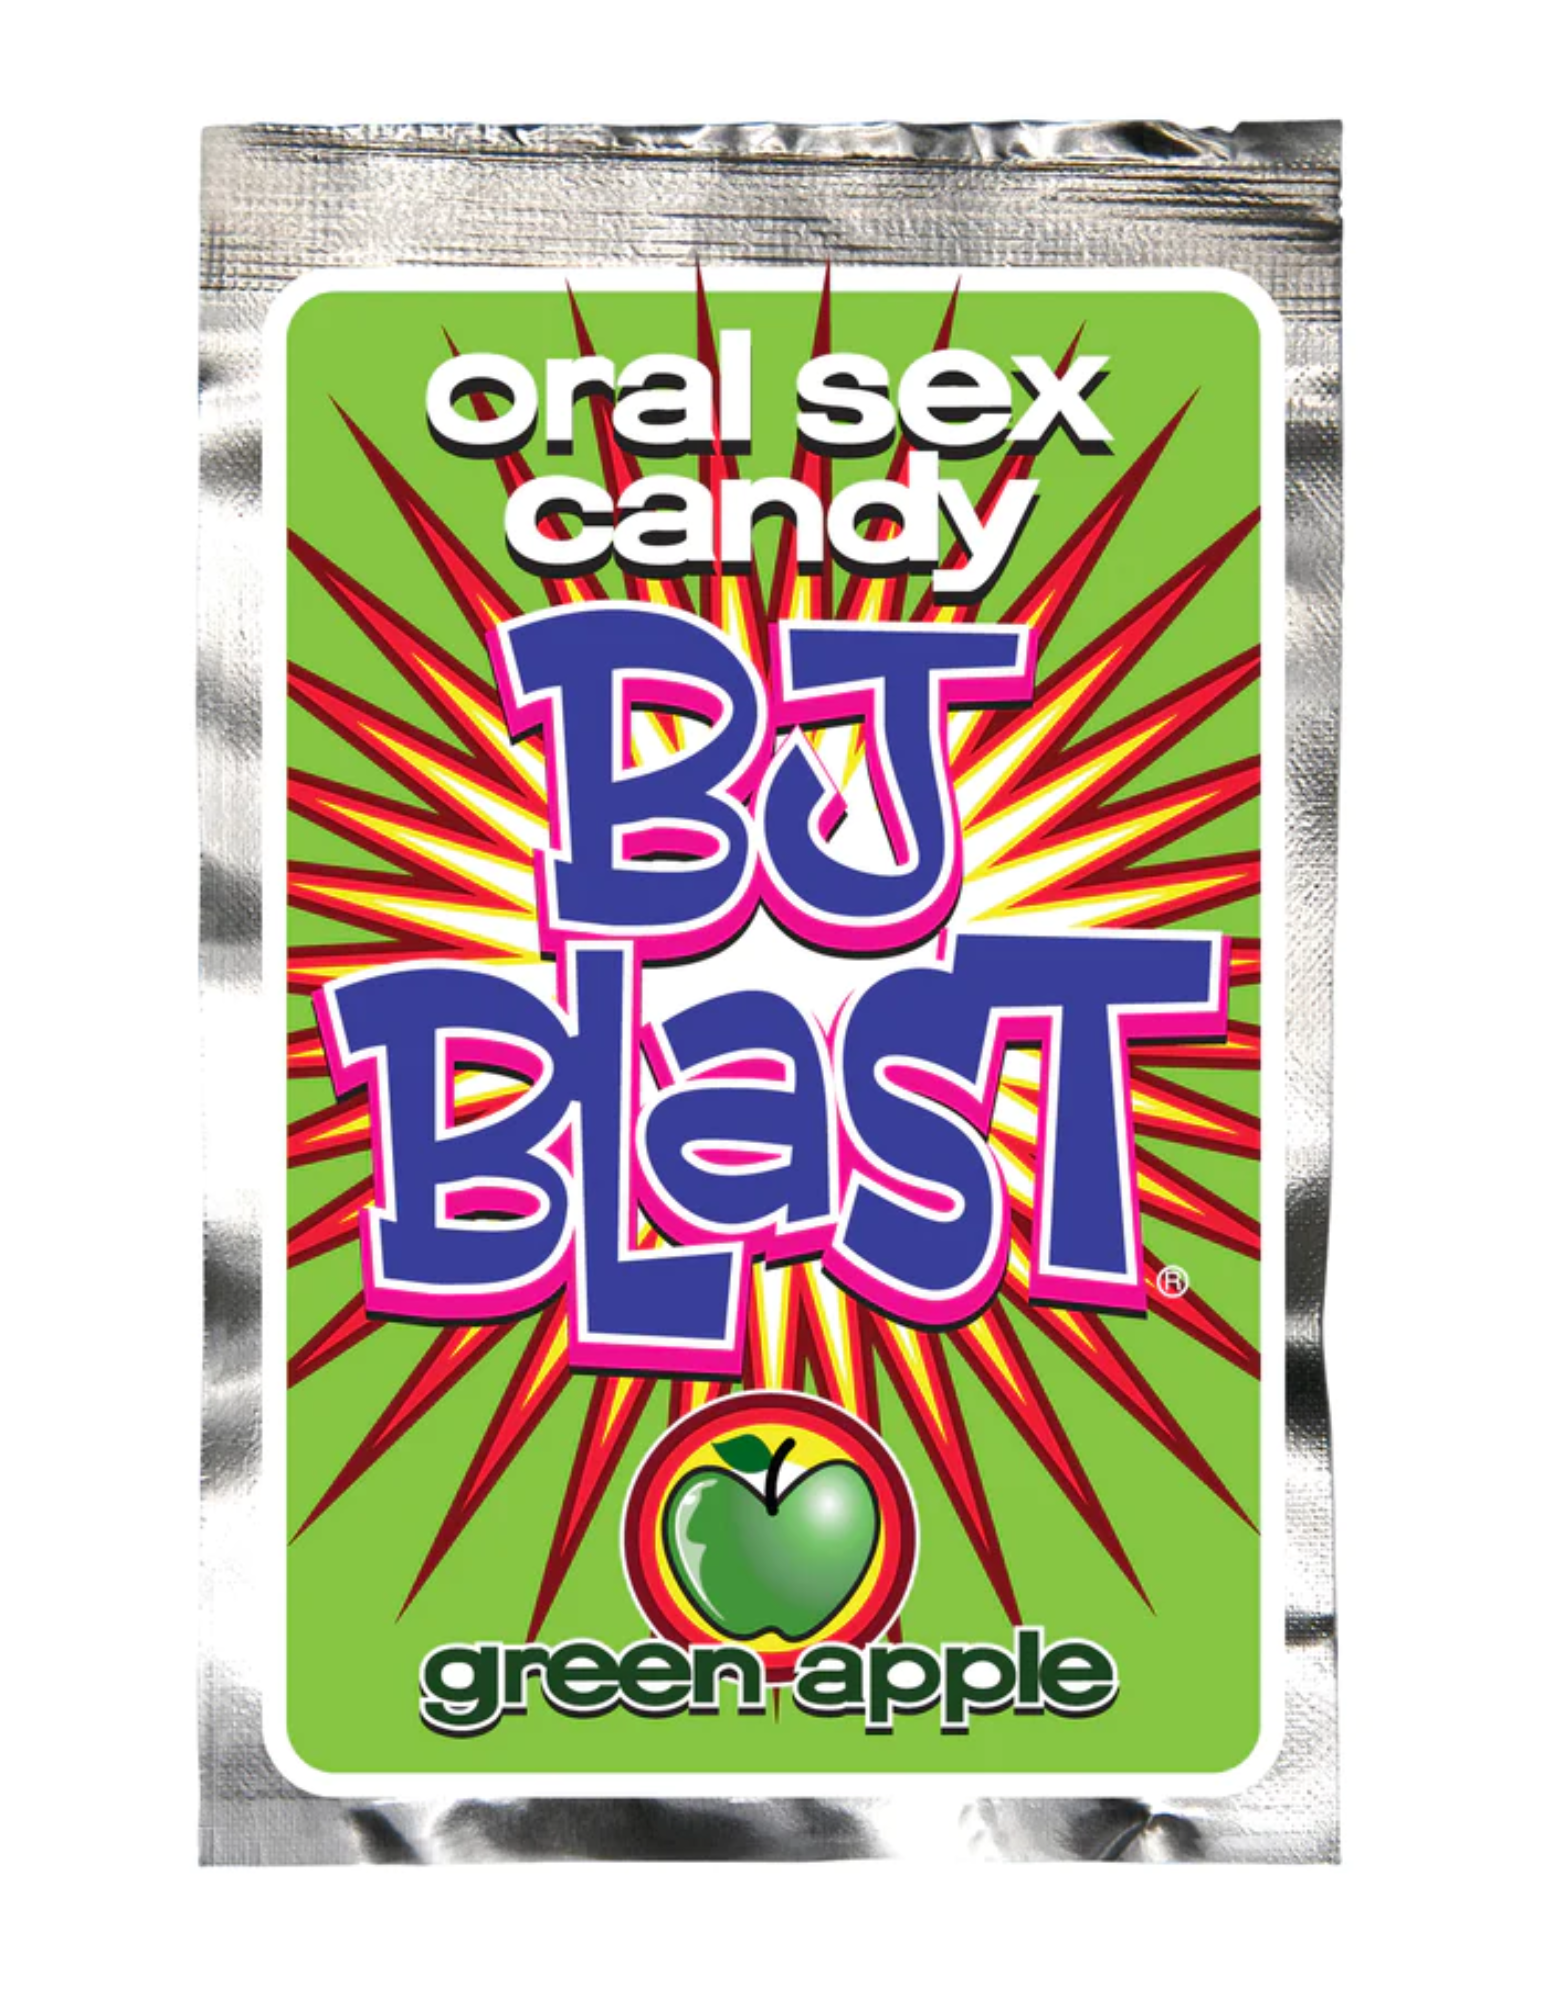 Photo shows the Green Apple flavor BJ Blast Oral Sex Candy from Pipedreams.